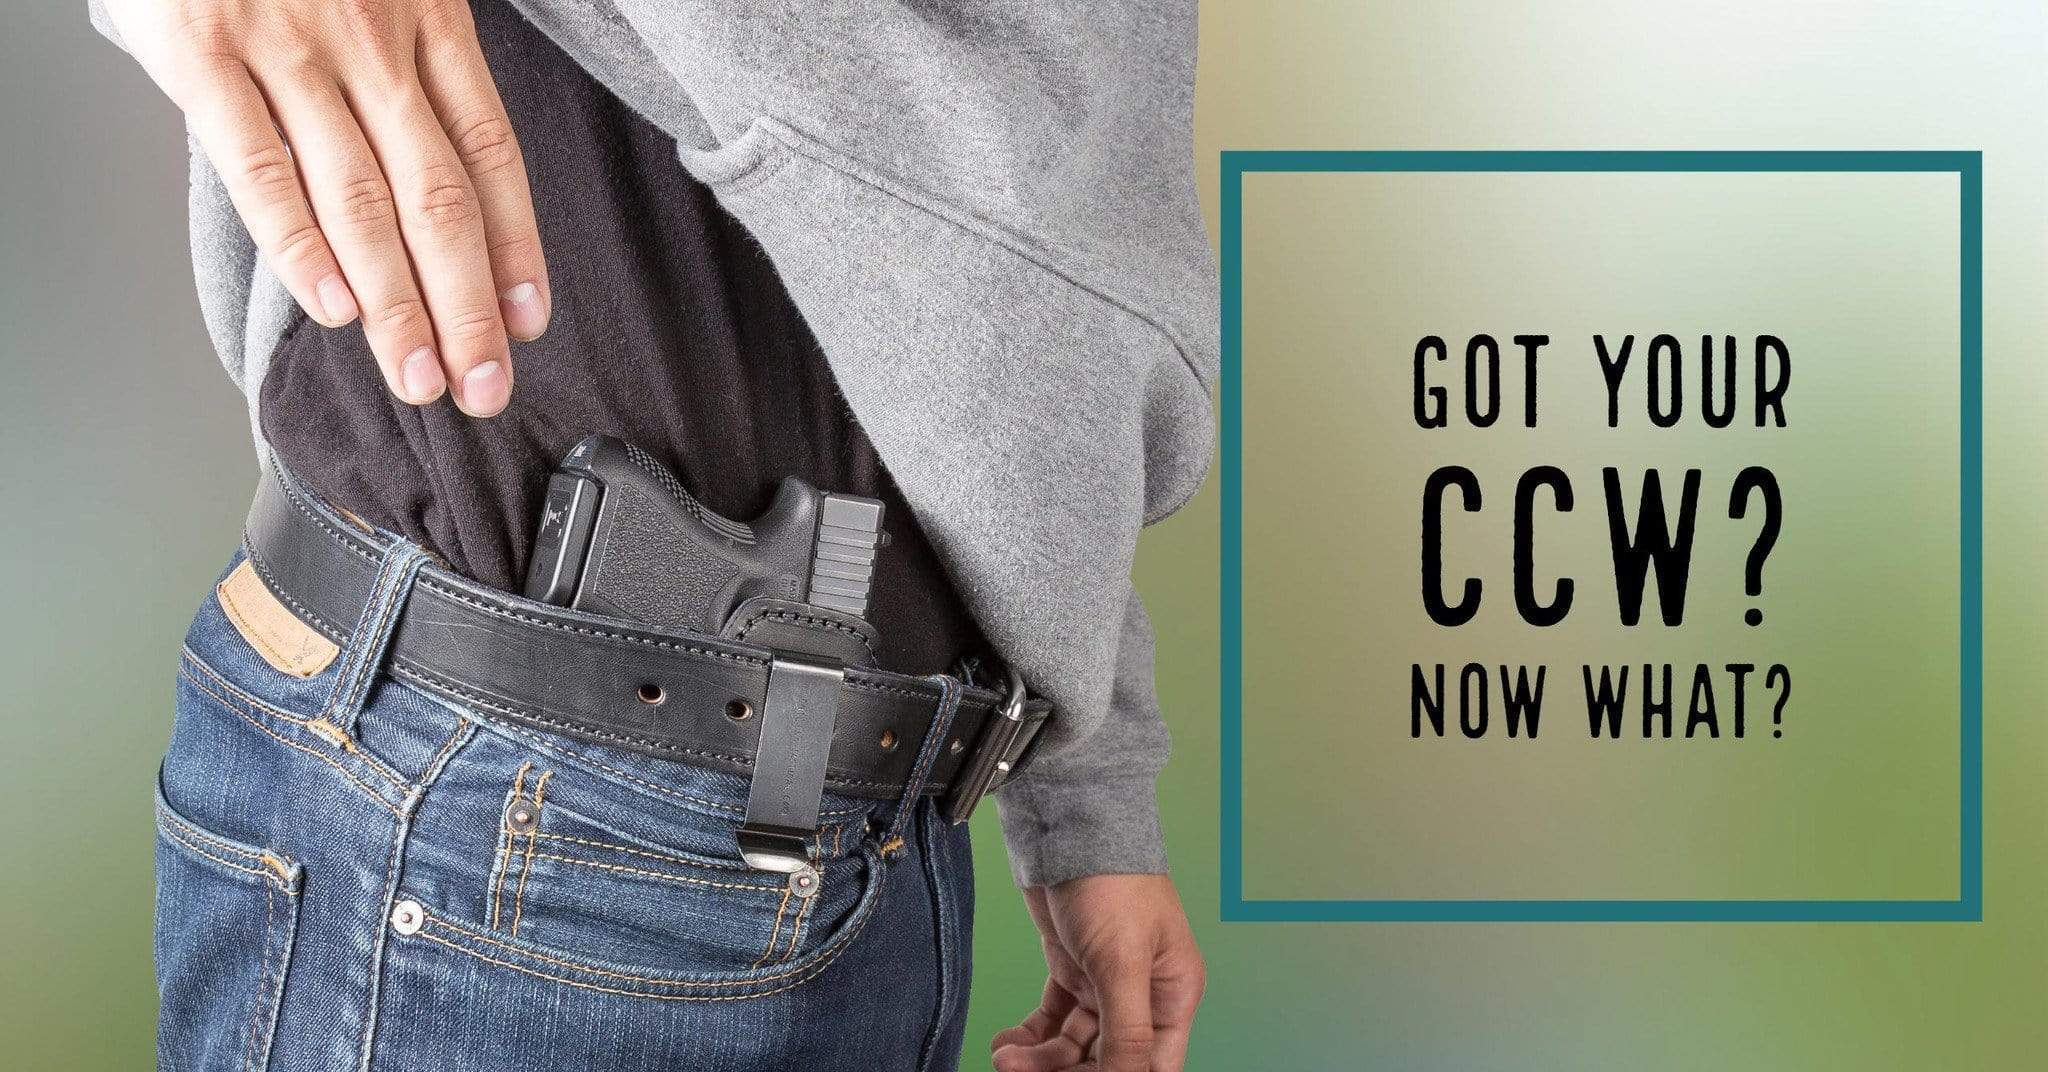 5 Clothing Tips for Those Who Have a Concealed Carry License